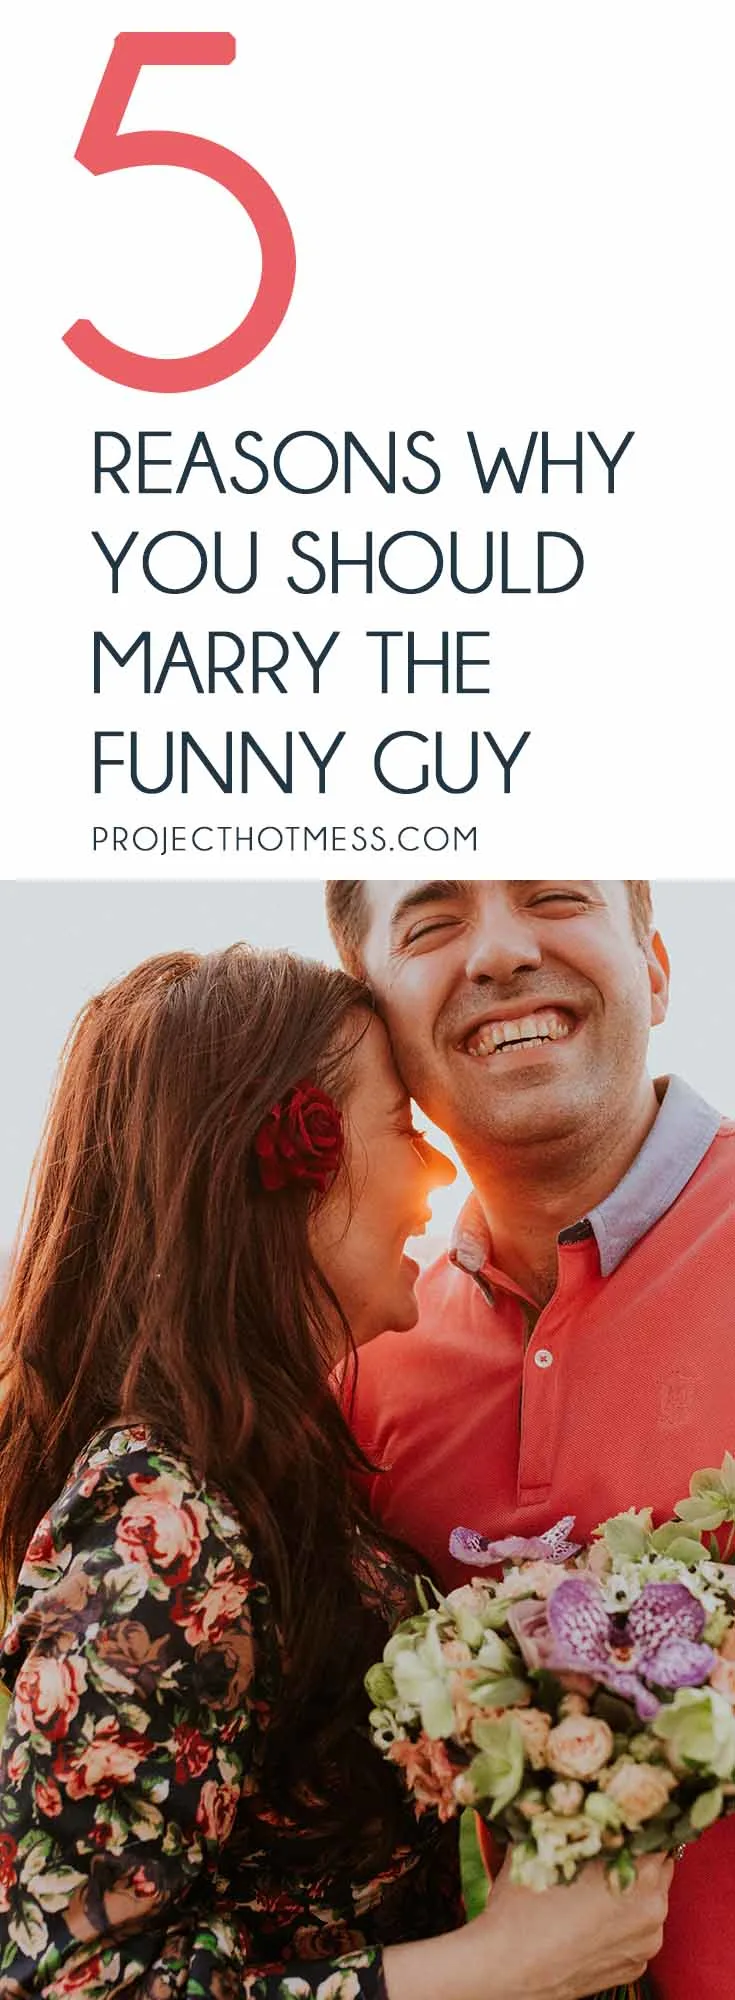 Our mothers may argue that we need to marry the rich guy or the kind guy, but if you want a lasting marriage, you should definitely marry the funny guy. Relationships | Marriage | Partner | Marriage Advice | Marriage Goals | In Love | Love | Marriage Problems | Spice Up Your Marriage | Marriage Ideas | Happy Marriage | Relationship Goals | Relationship Advice | Relationship Tips |